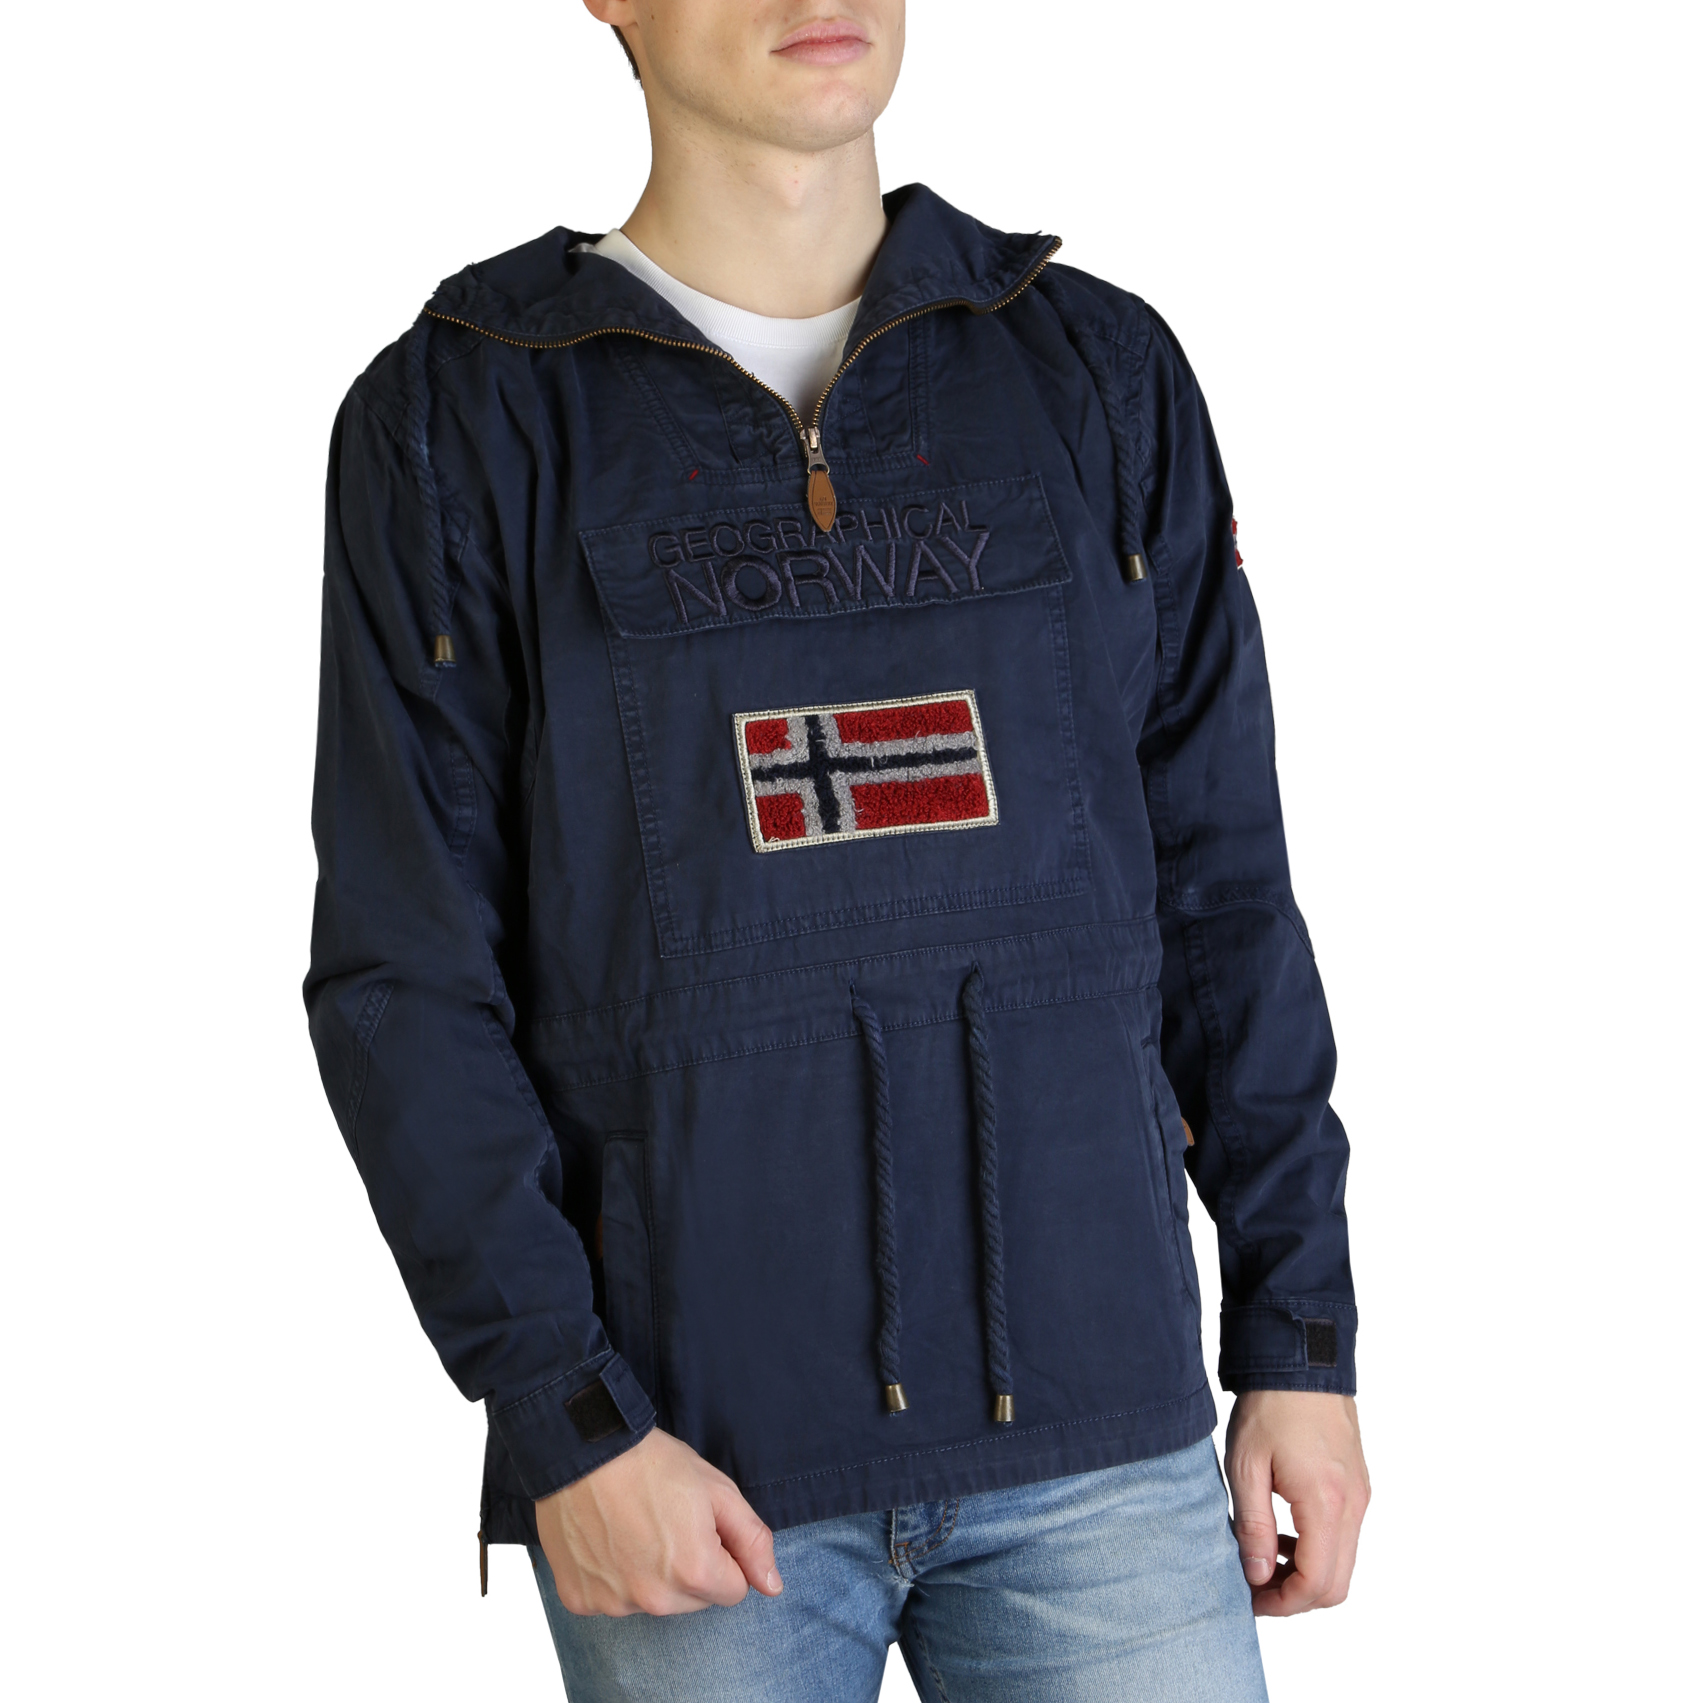 Geographical Norway - Veste Chomer man